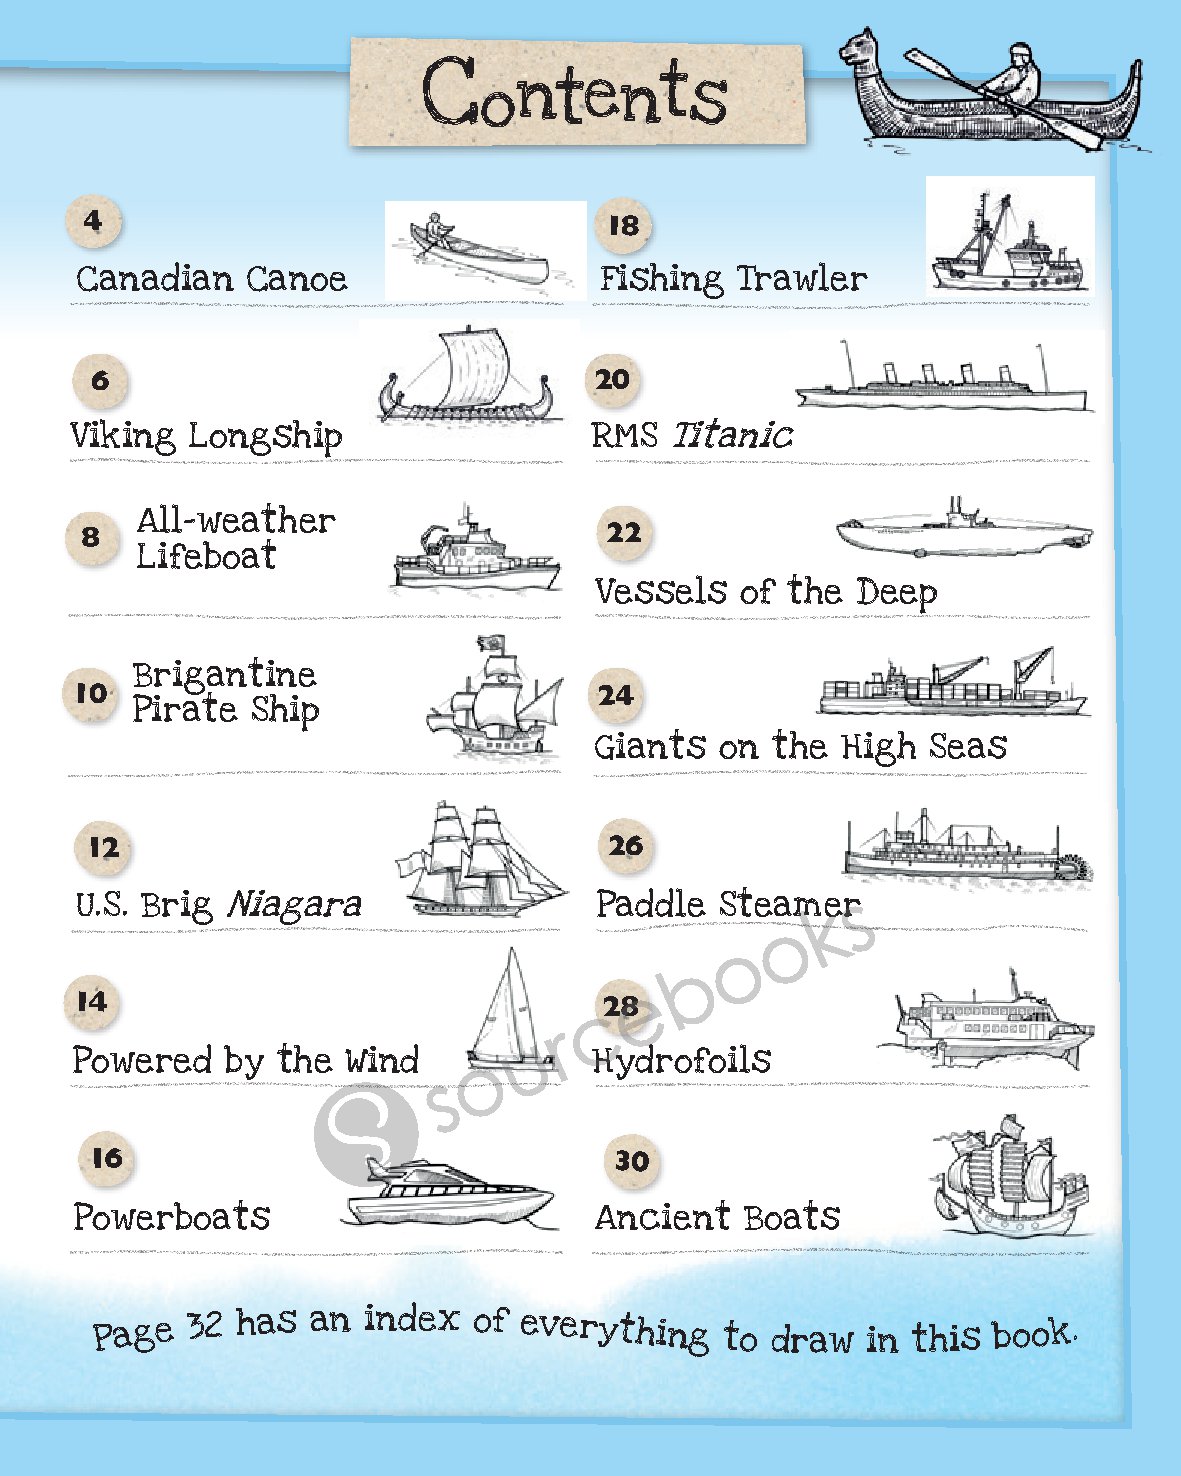 How to Draw Cool Ships and Boats